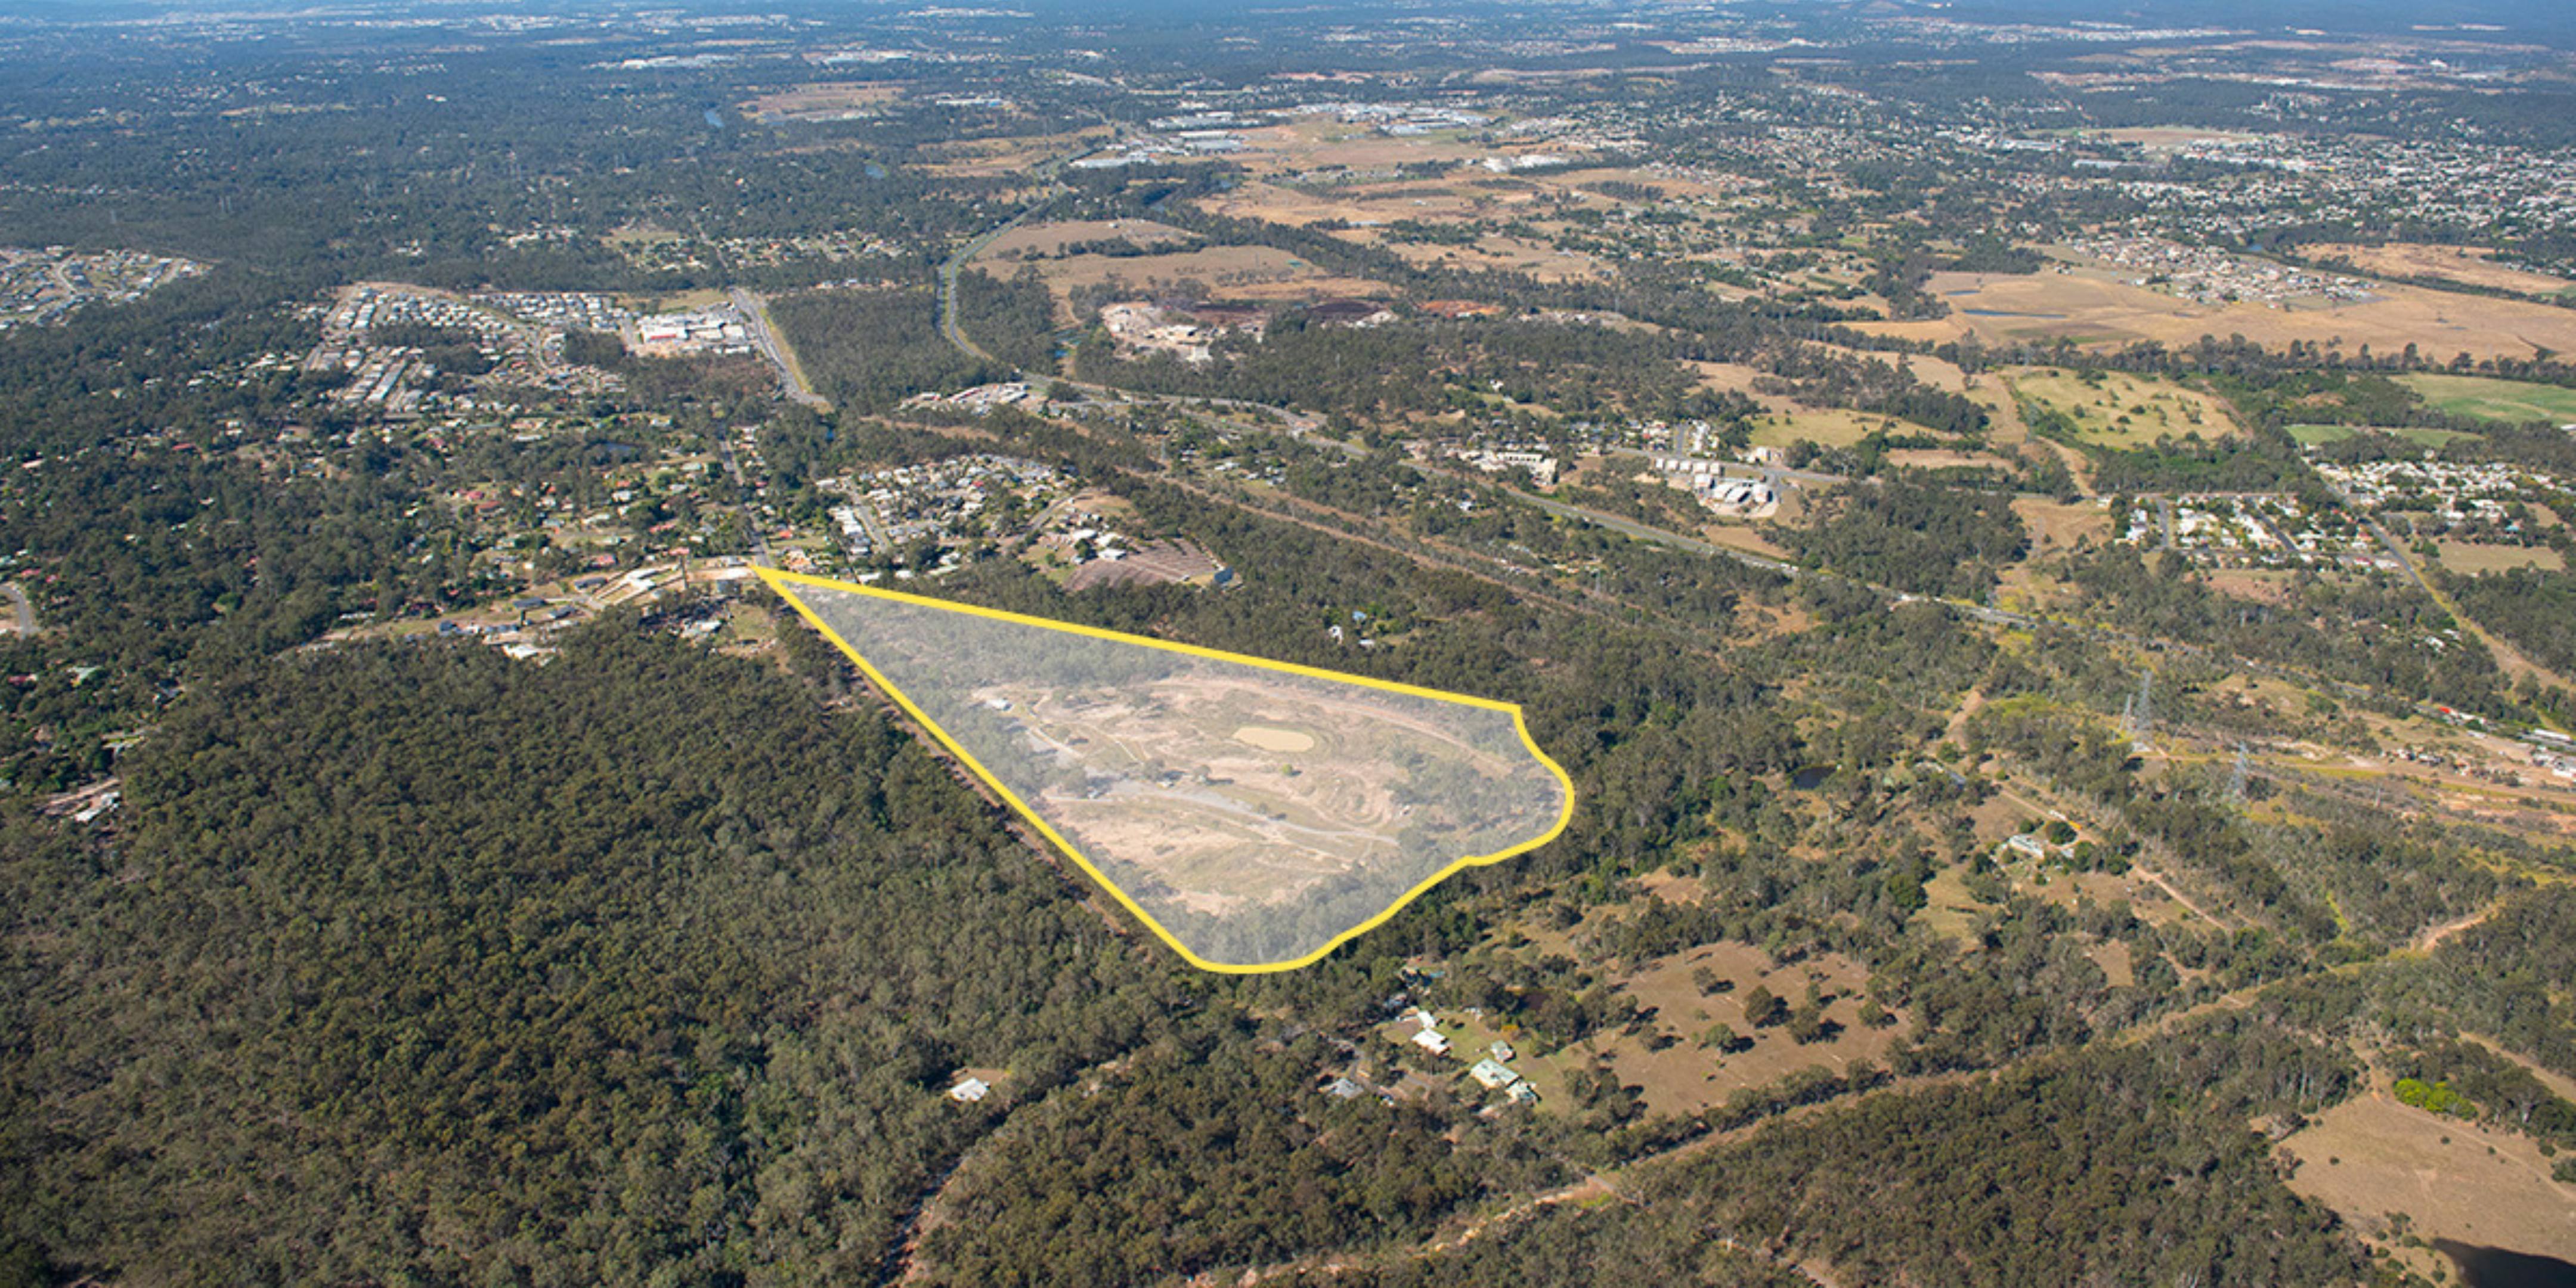 Former Motocross Raceway Site with Development Opportunity Brought to Market